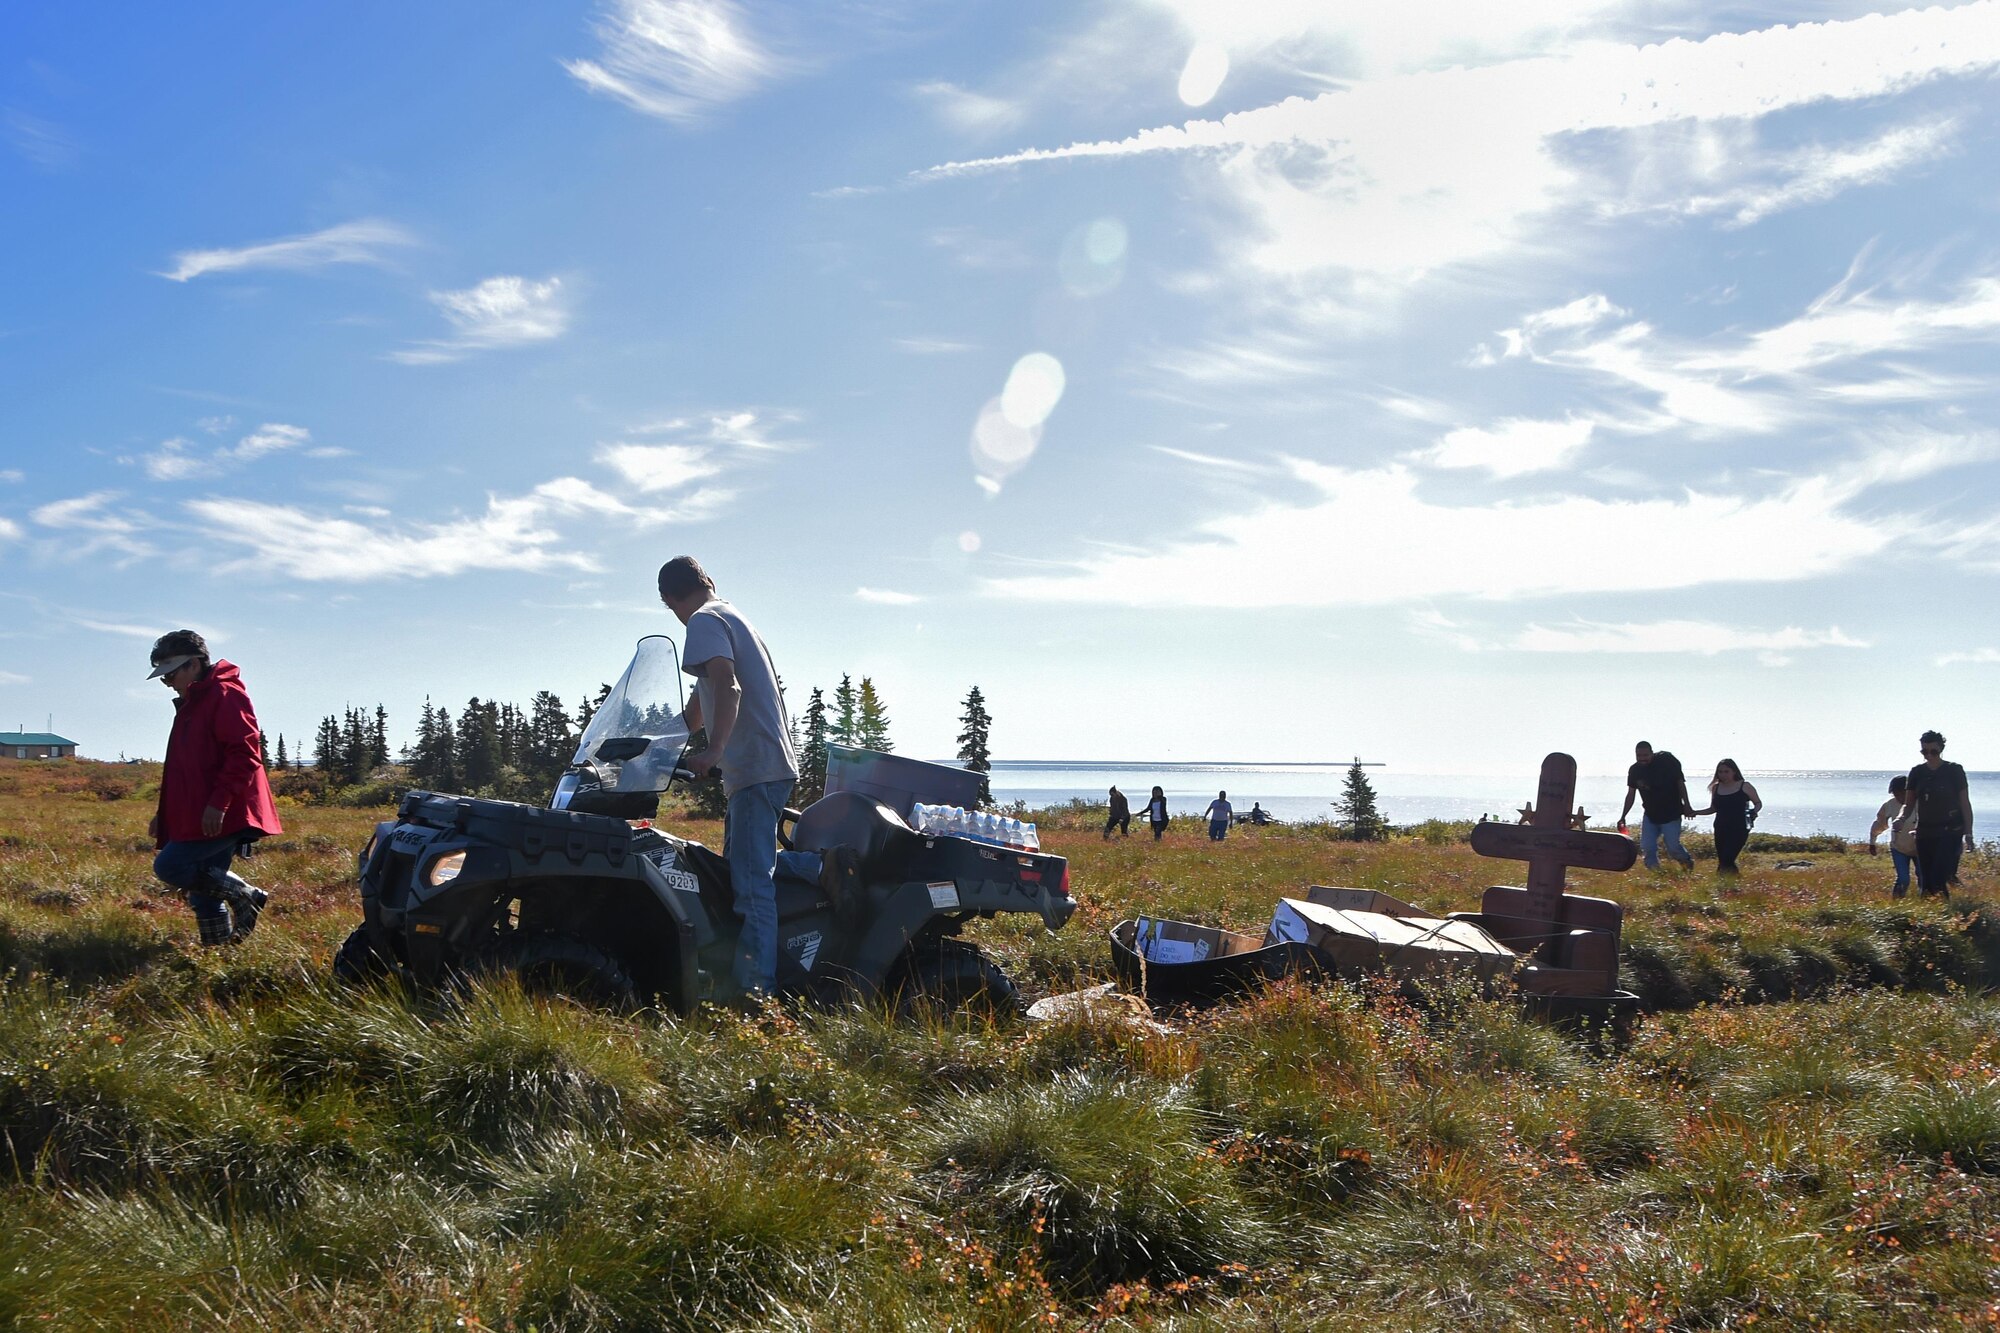 The grave marker of former Alaska Adjutant General Maj. Gen. John Schaeffer Jr, is transported by all-terrain vehicle at Ivik, Alaska, Aug. 31, 2016. Schaeffer enlisted in the Alaska National Guard in 1957, and served for 34 years.  Schaeffer was the first Alaska Native two-star general of the Alaska National Guard and commissioner of the Alaska Department of Military and Veterans Affairs. He is survived by Mary his wife of 56 years. (U.S. Air Force photo by Airman 1st Class Javier Alvarez)